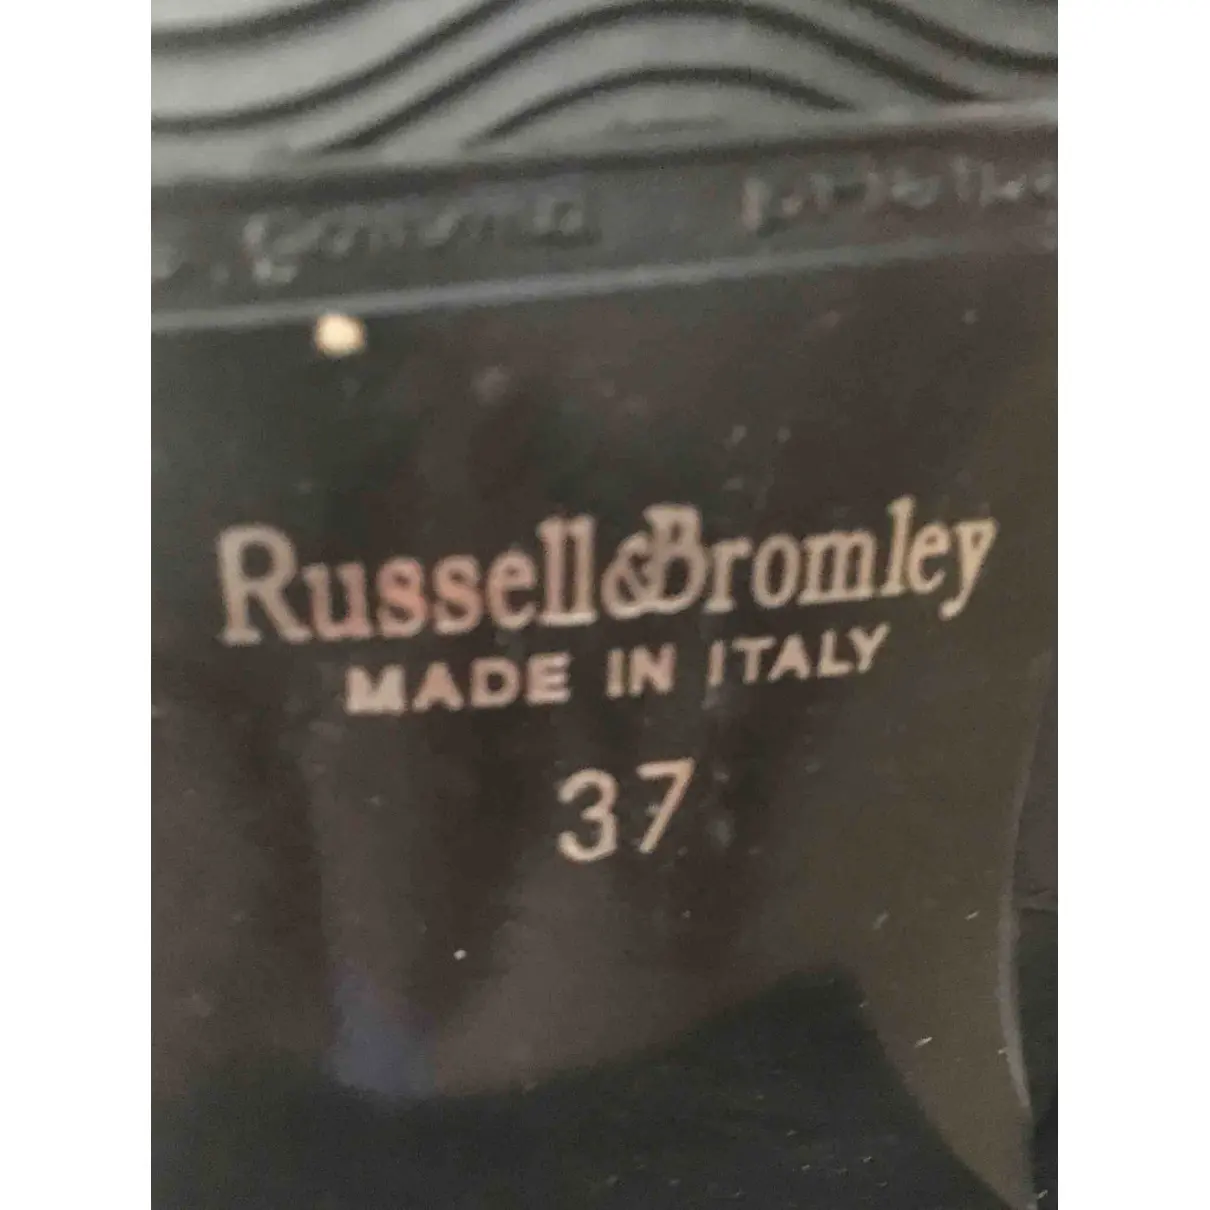 Russell & Bromley Leather boots for sale